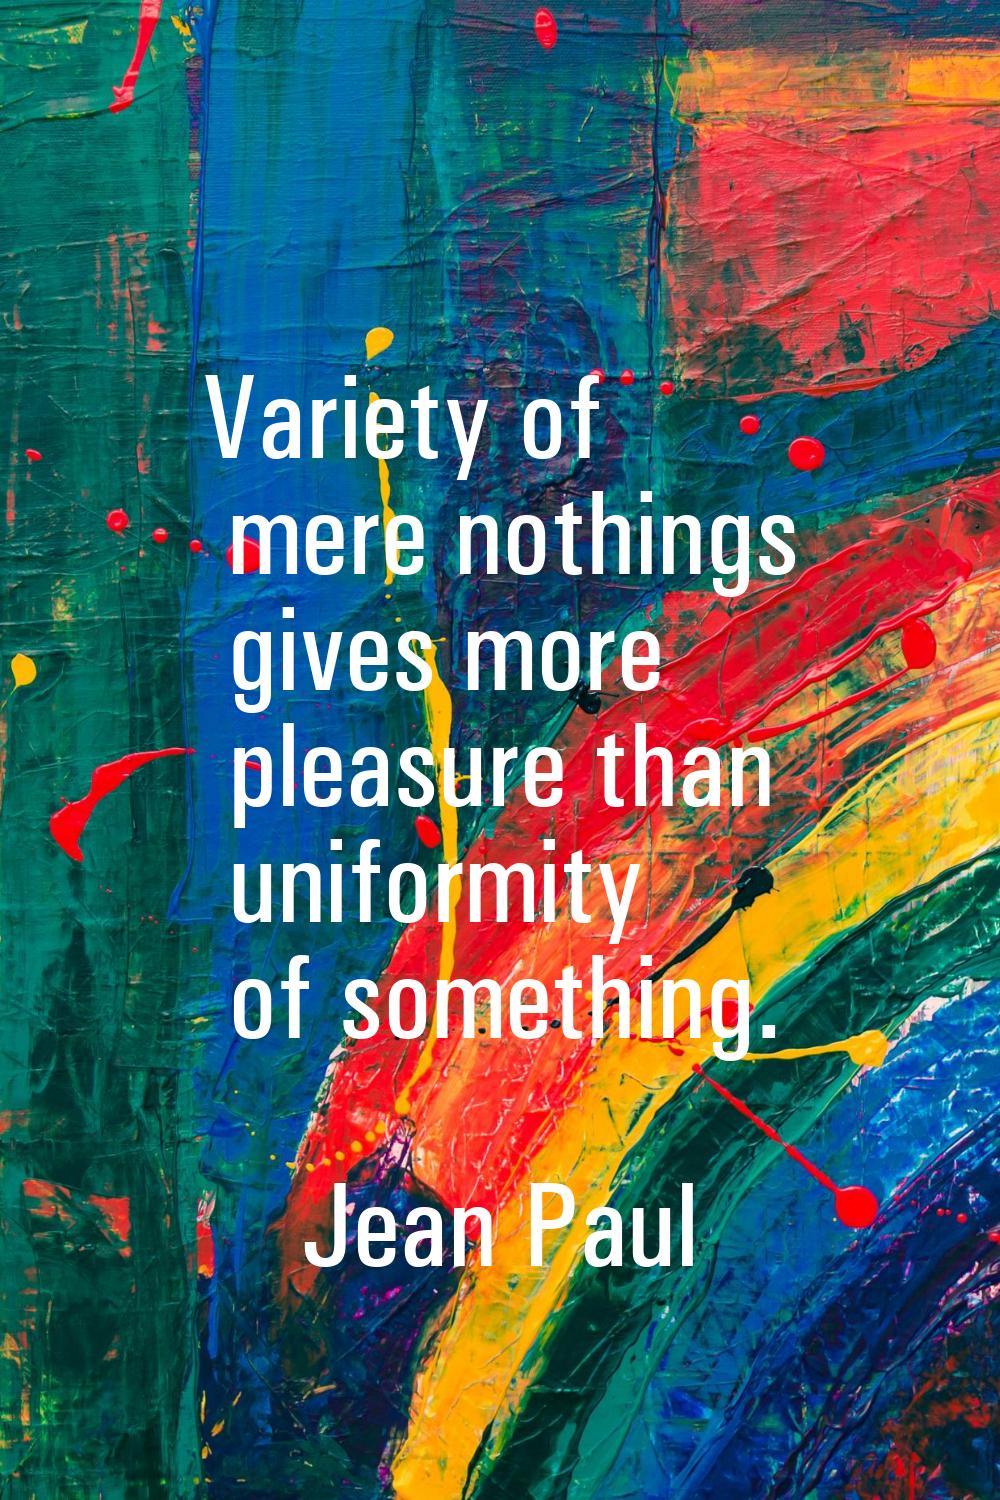 Variety of mere nothings gives more pleasure than uniformity of something.